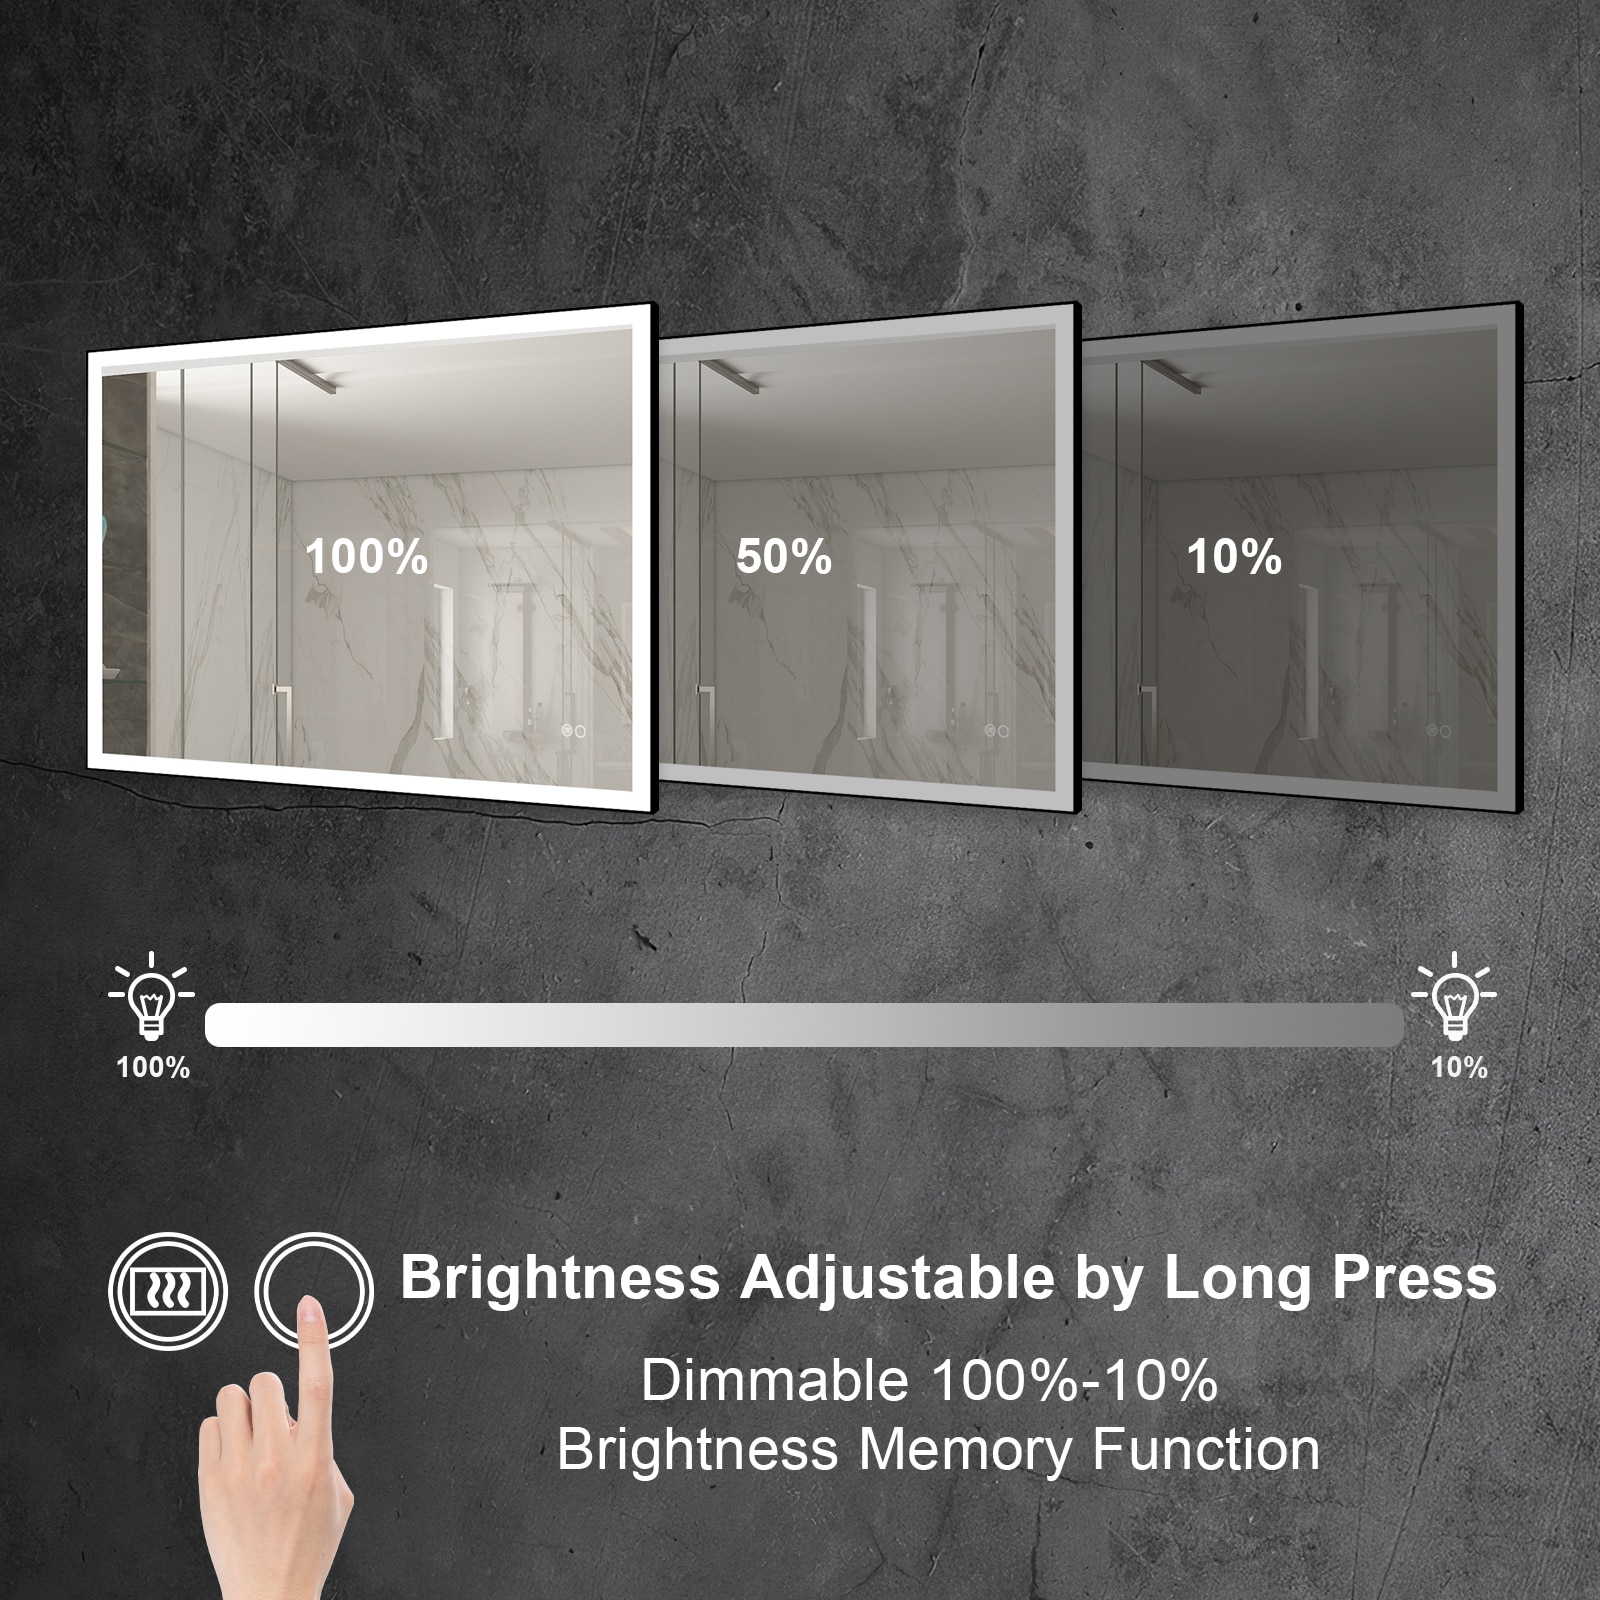 WELLFOR W5 Bathroom Mirrors 48-in x 36-in Dimmable Lighted Matte Black ...